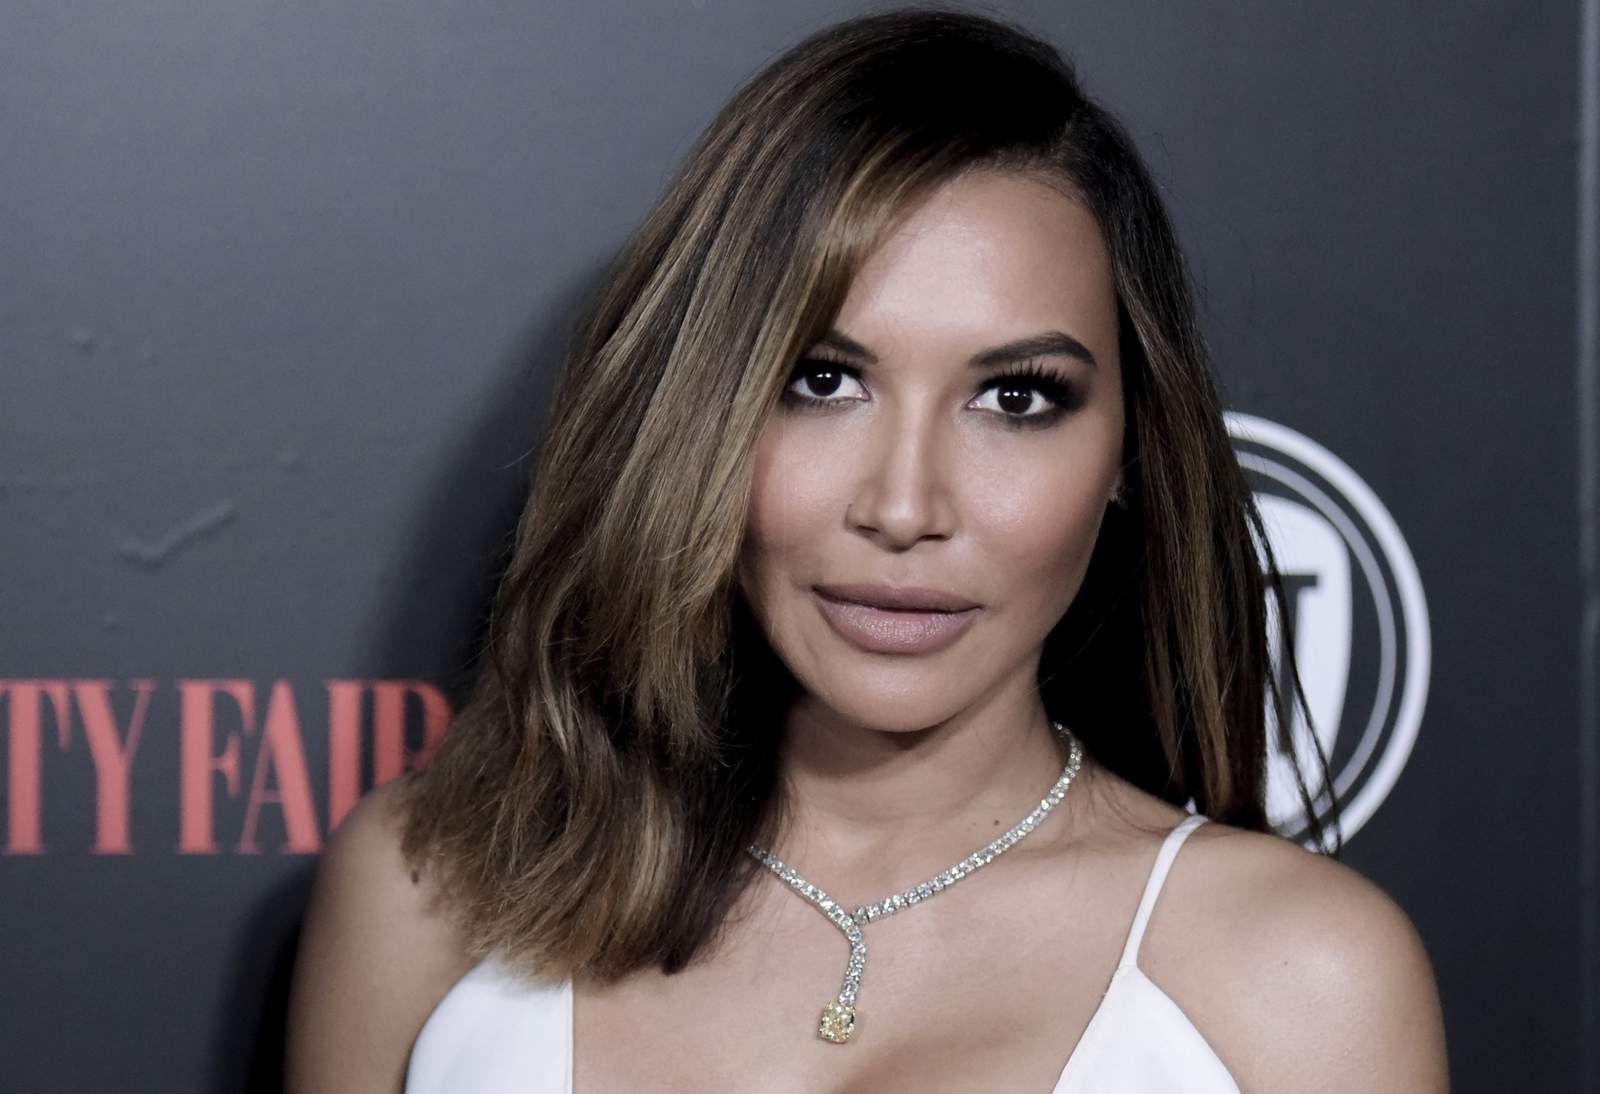 Autopsy report: Naya Rivera called for help as she drowned